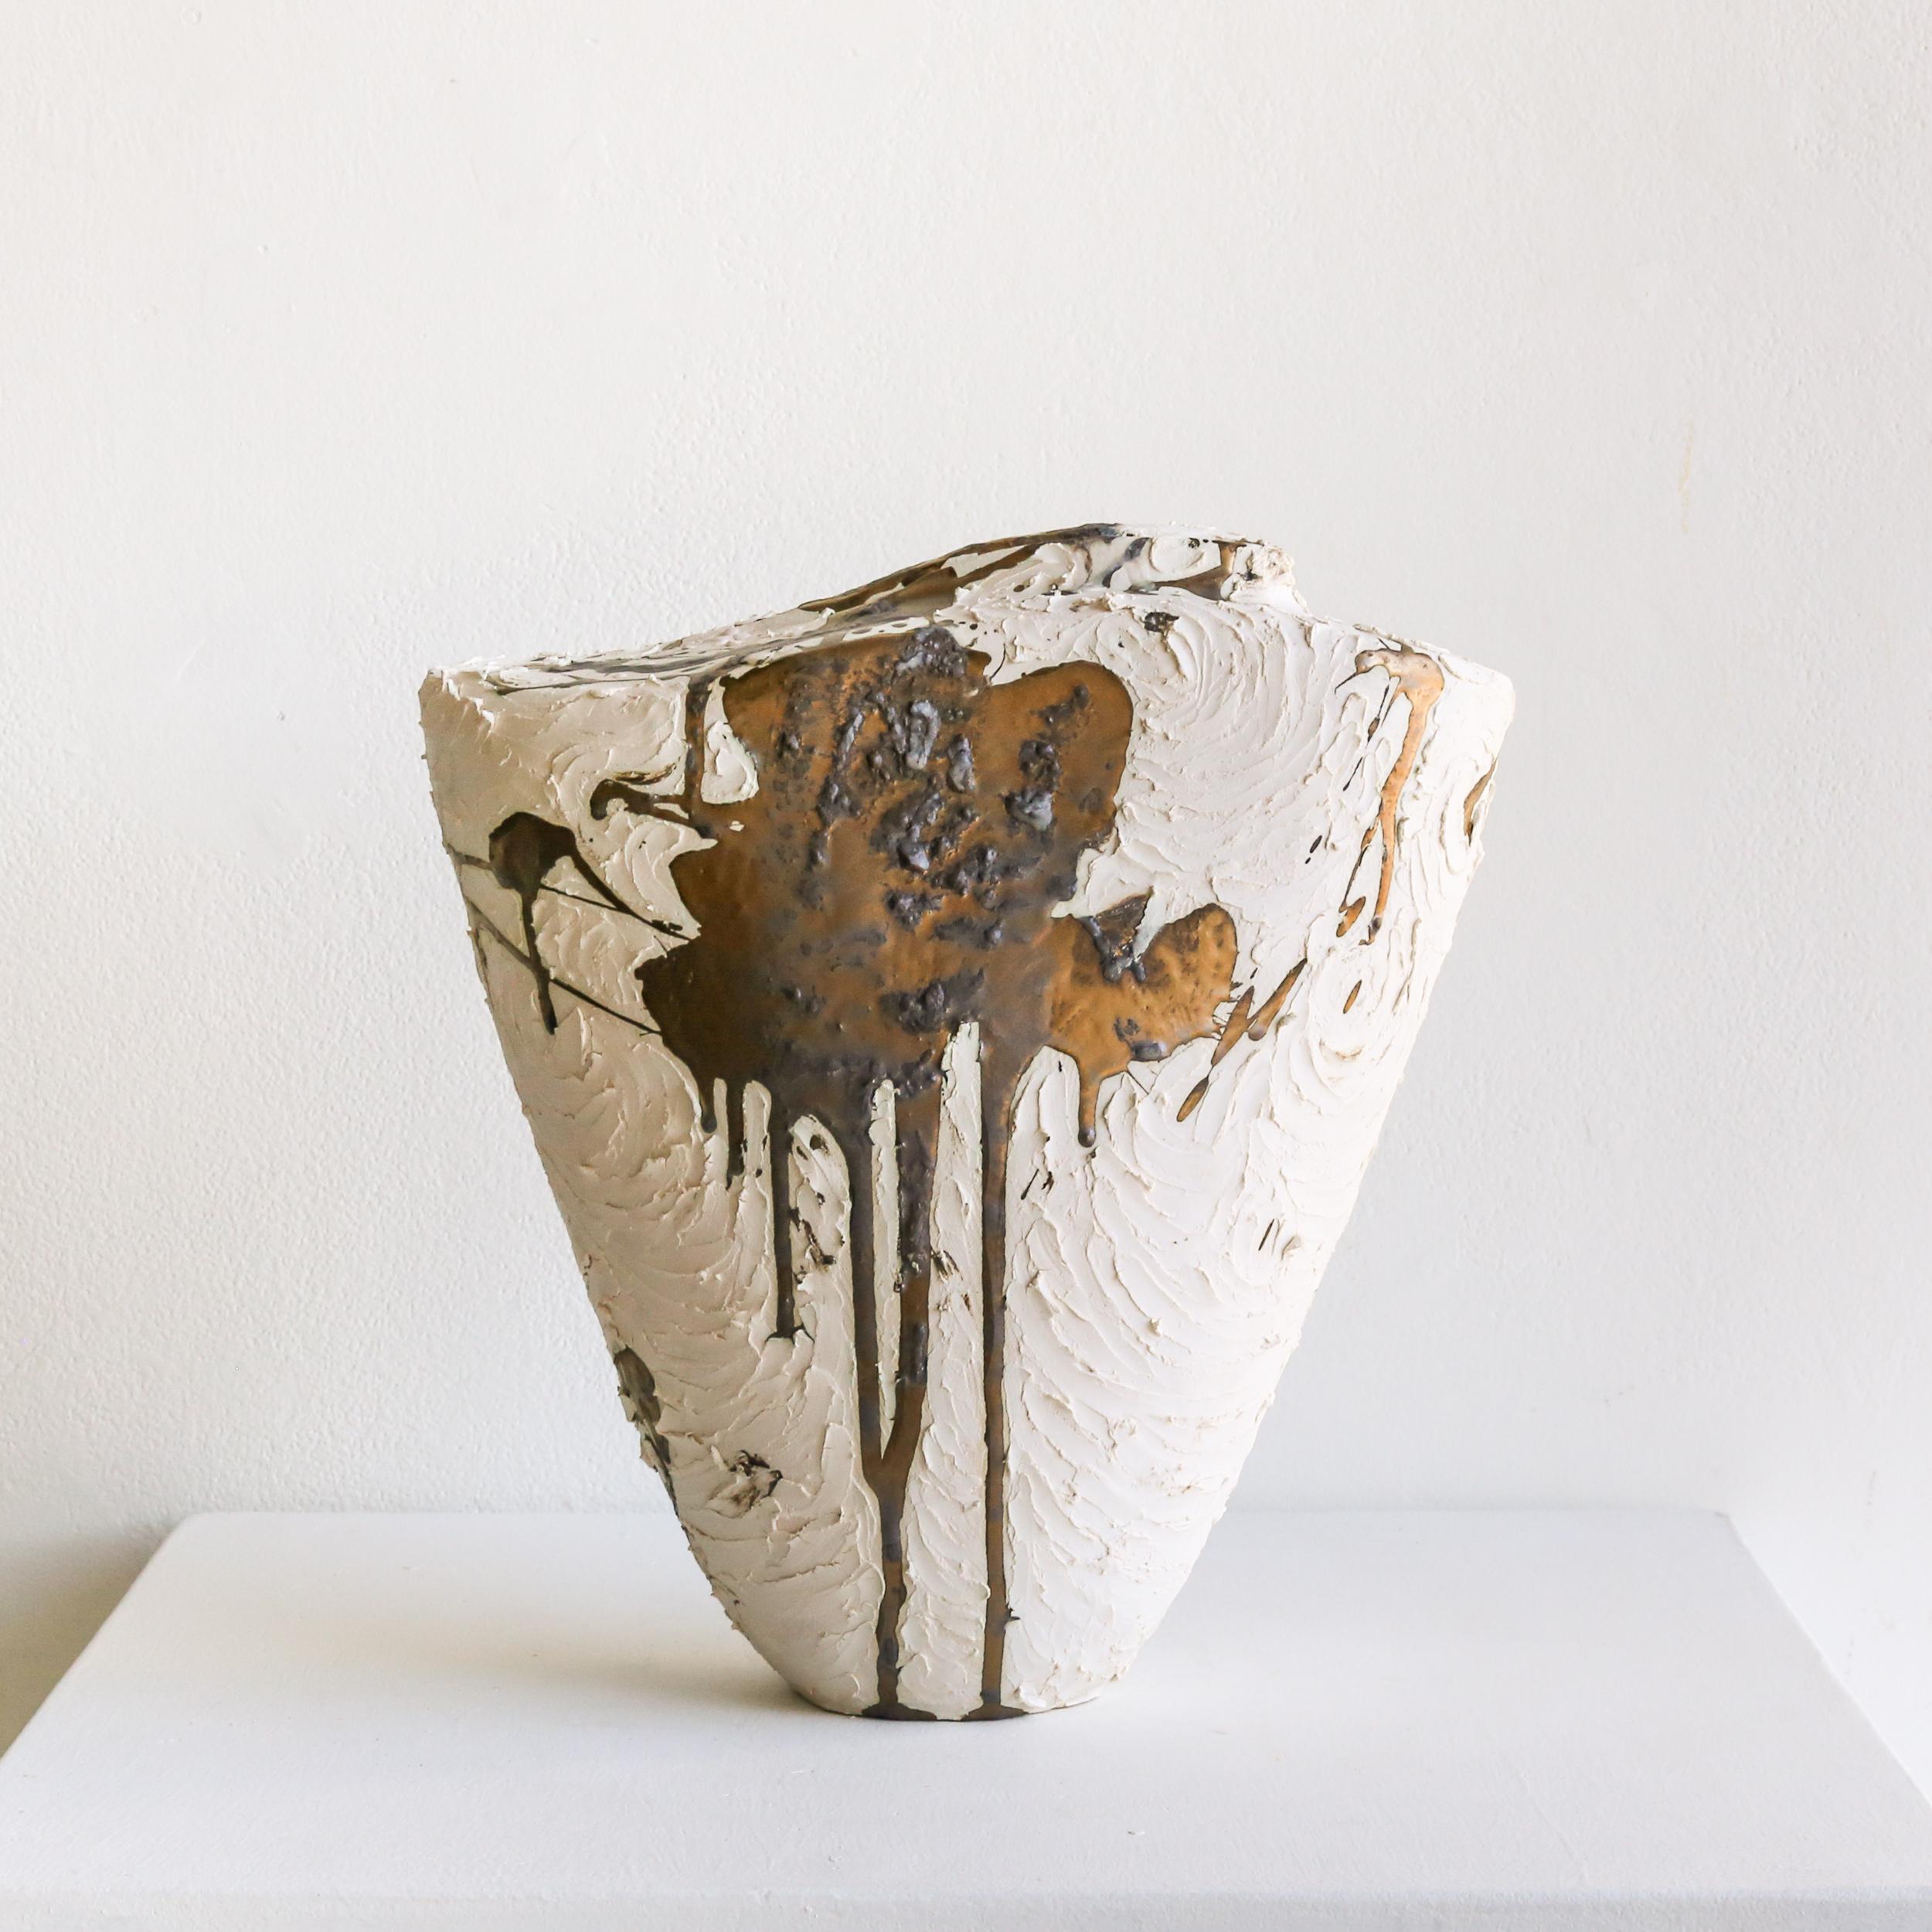 White And Gold Vessel No 123 - Sculpture by Beverly Morrison